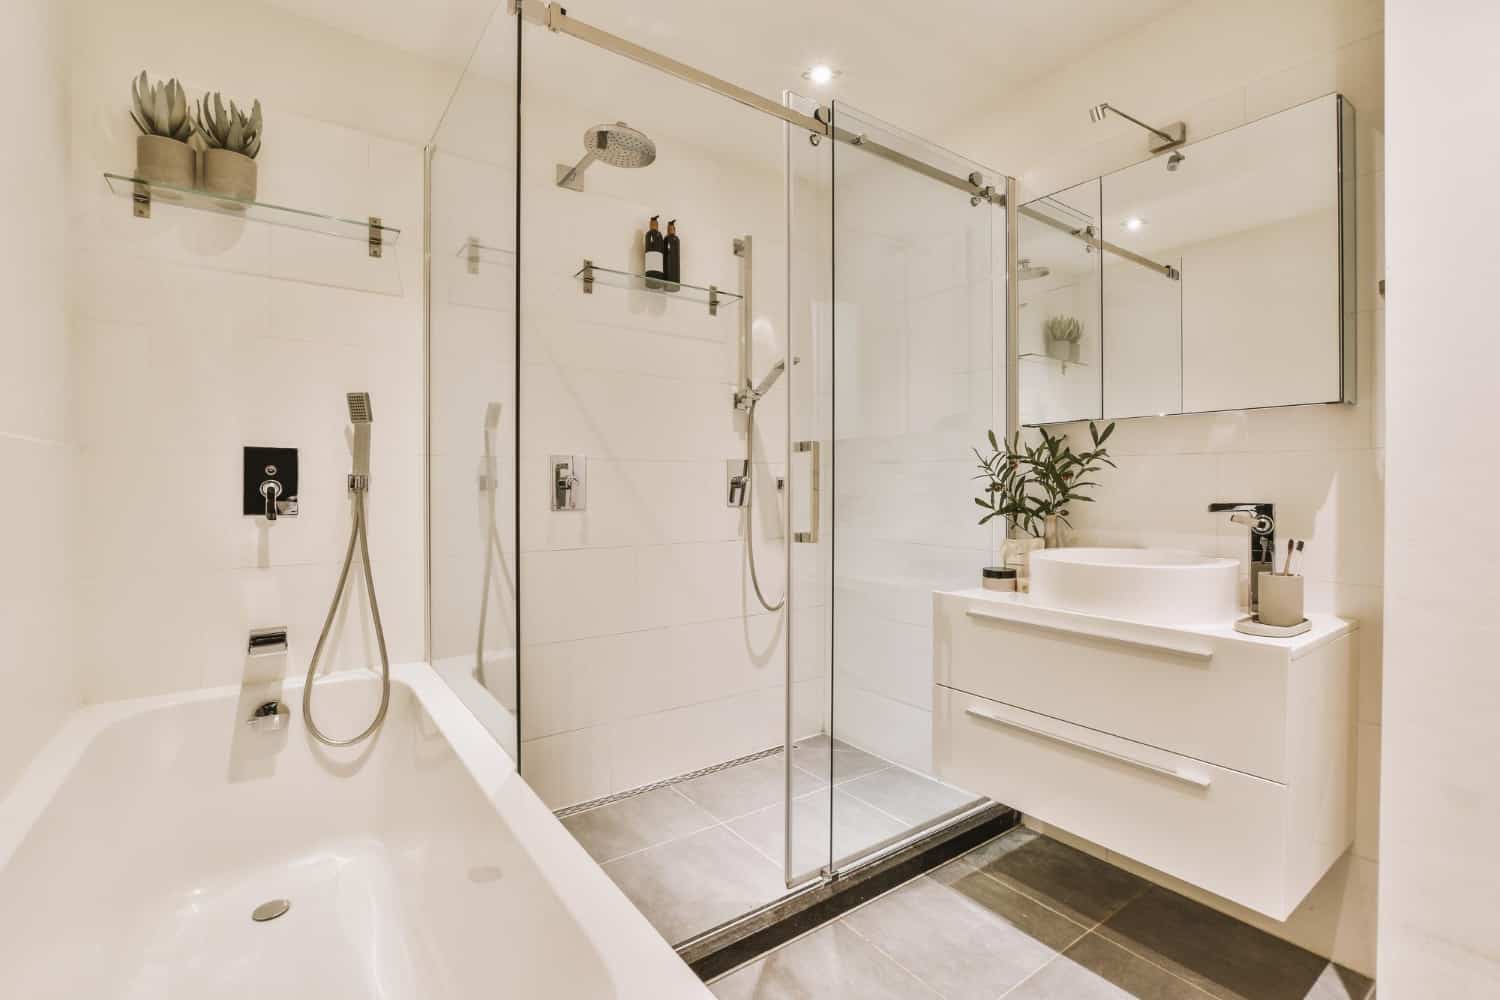 AN elegant all-white bathroom with a large glass door shower and whiter tub. The walls are covered with white tiles and recessed lighting makes the room bright and well-lit.